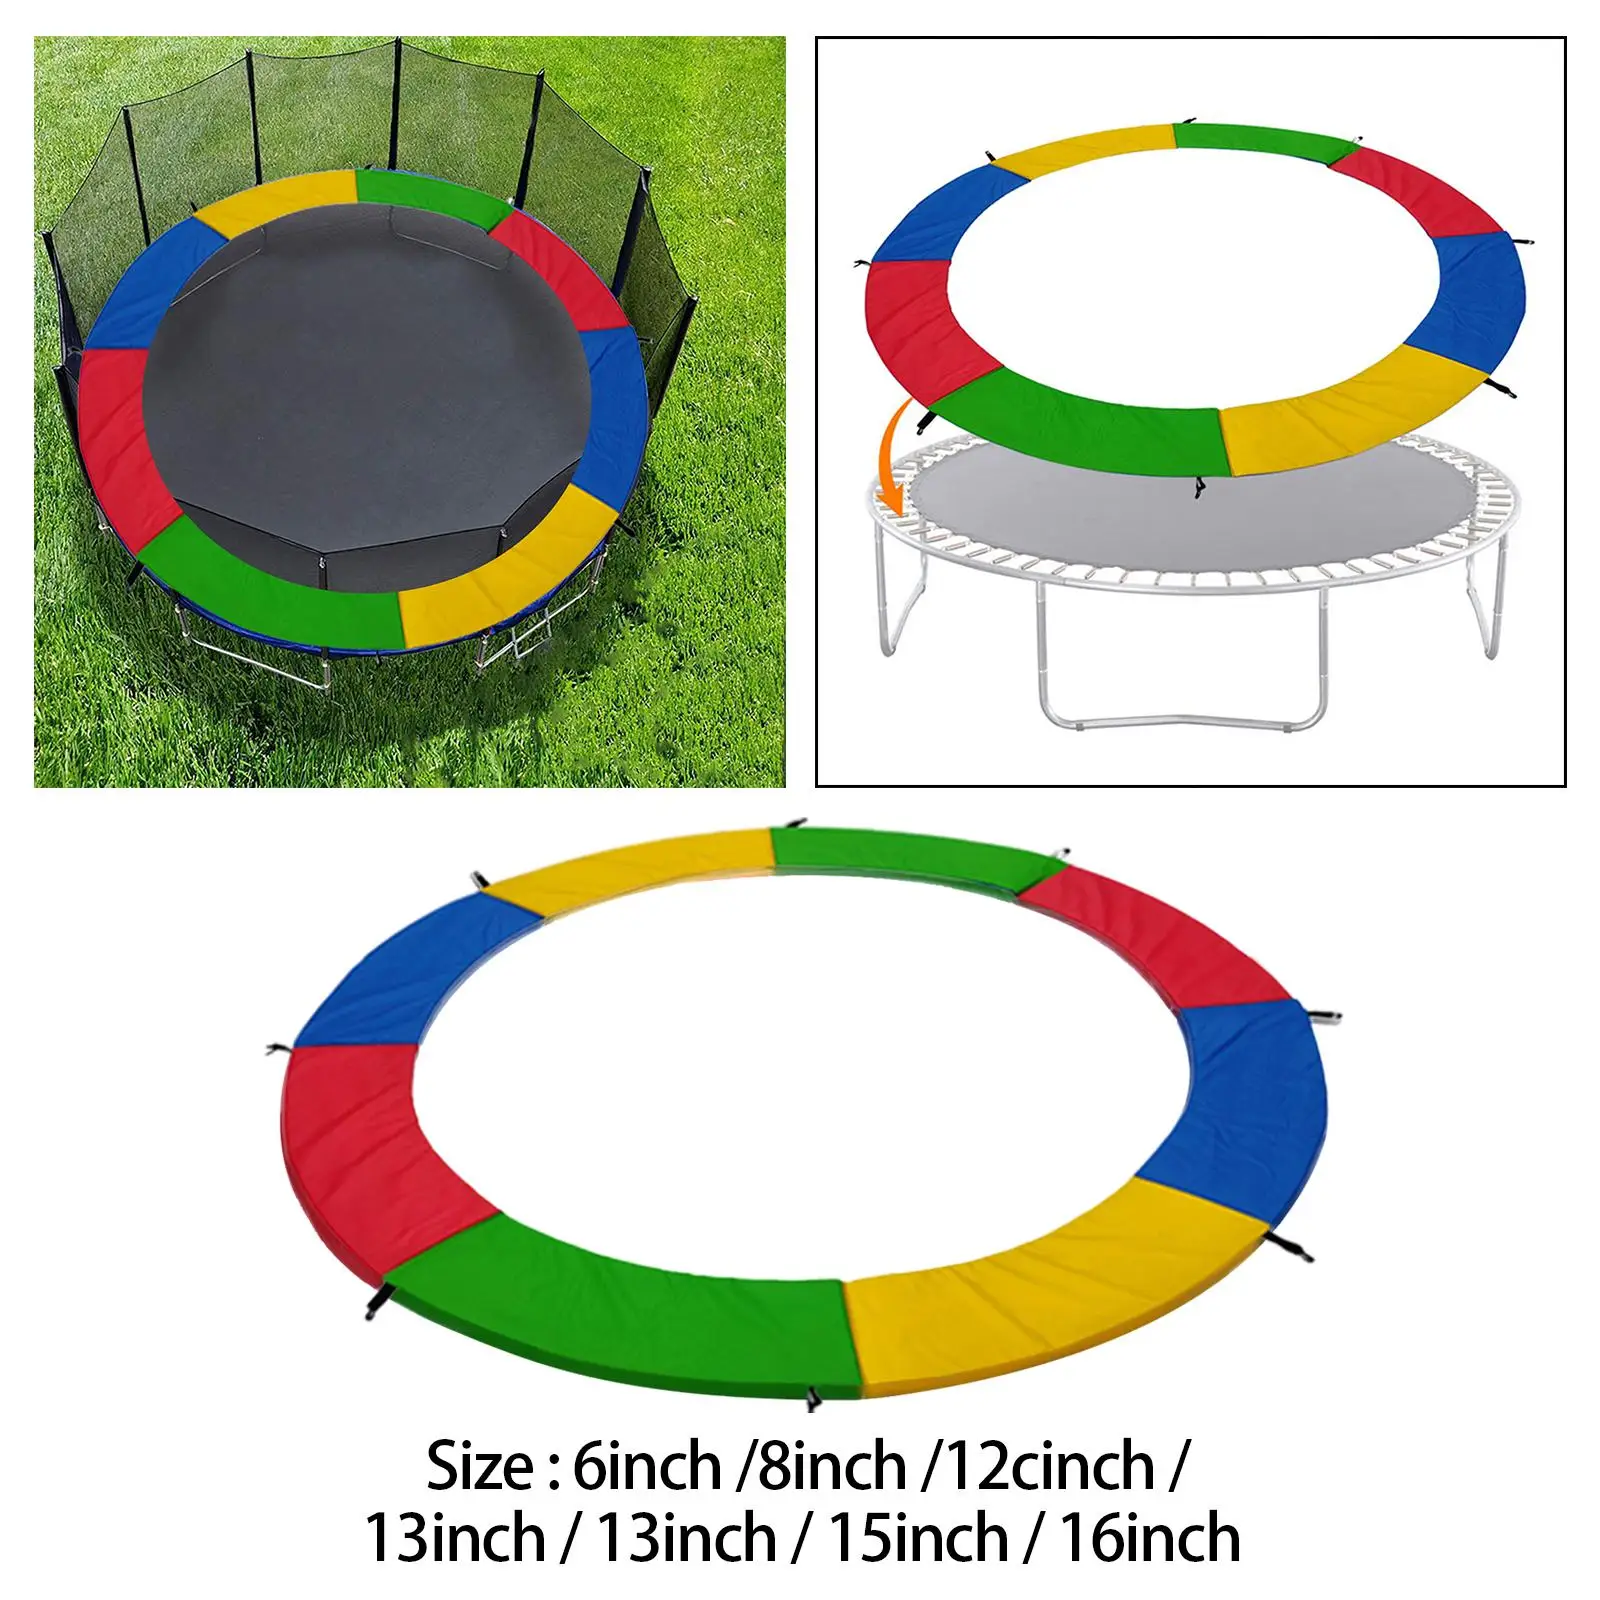 Trampoline Replacement, Water Shock Absorbent Jumping Bed Cover Surround Spring Cover for Outdoor Universal